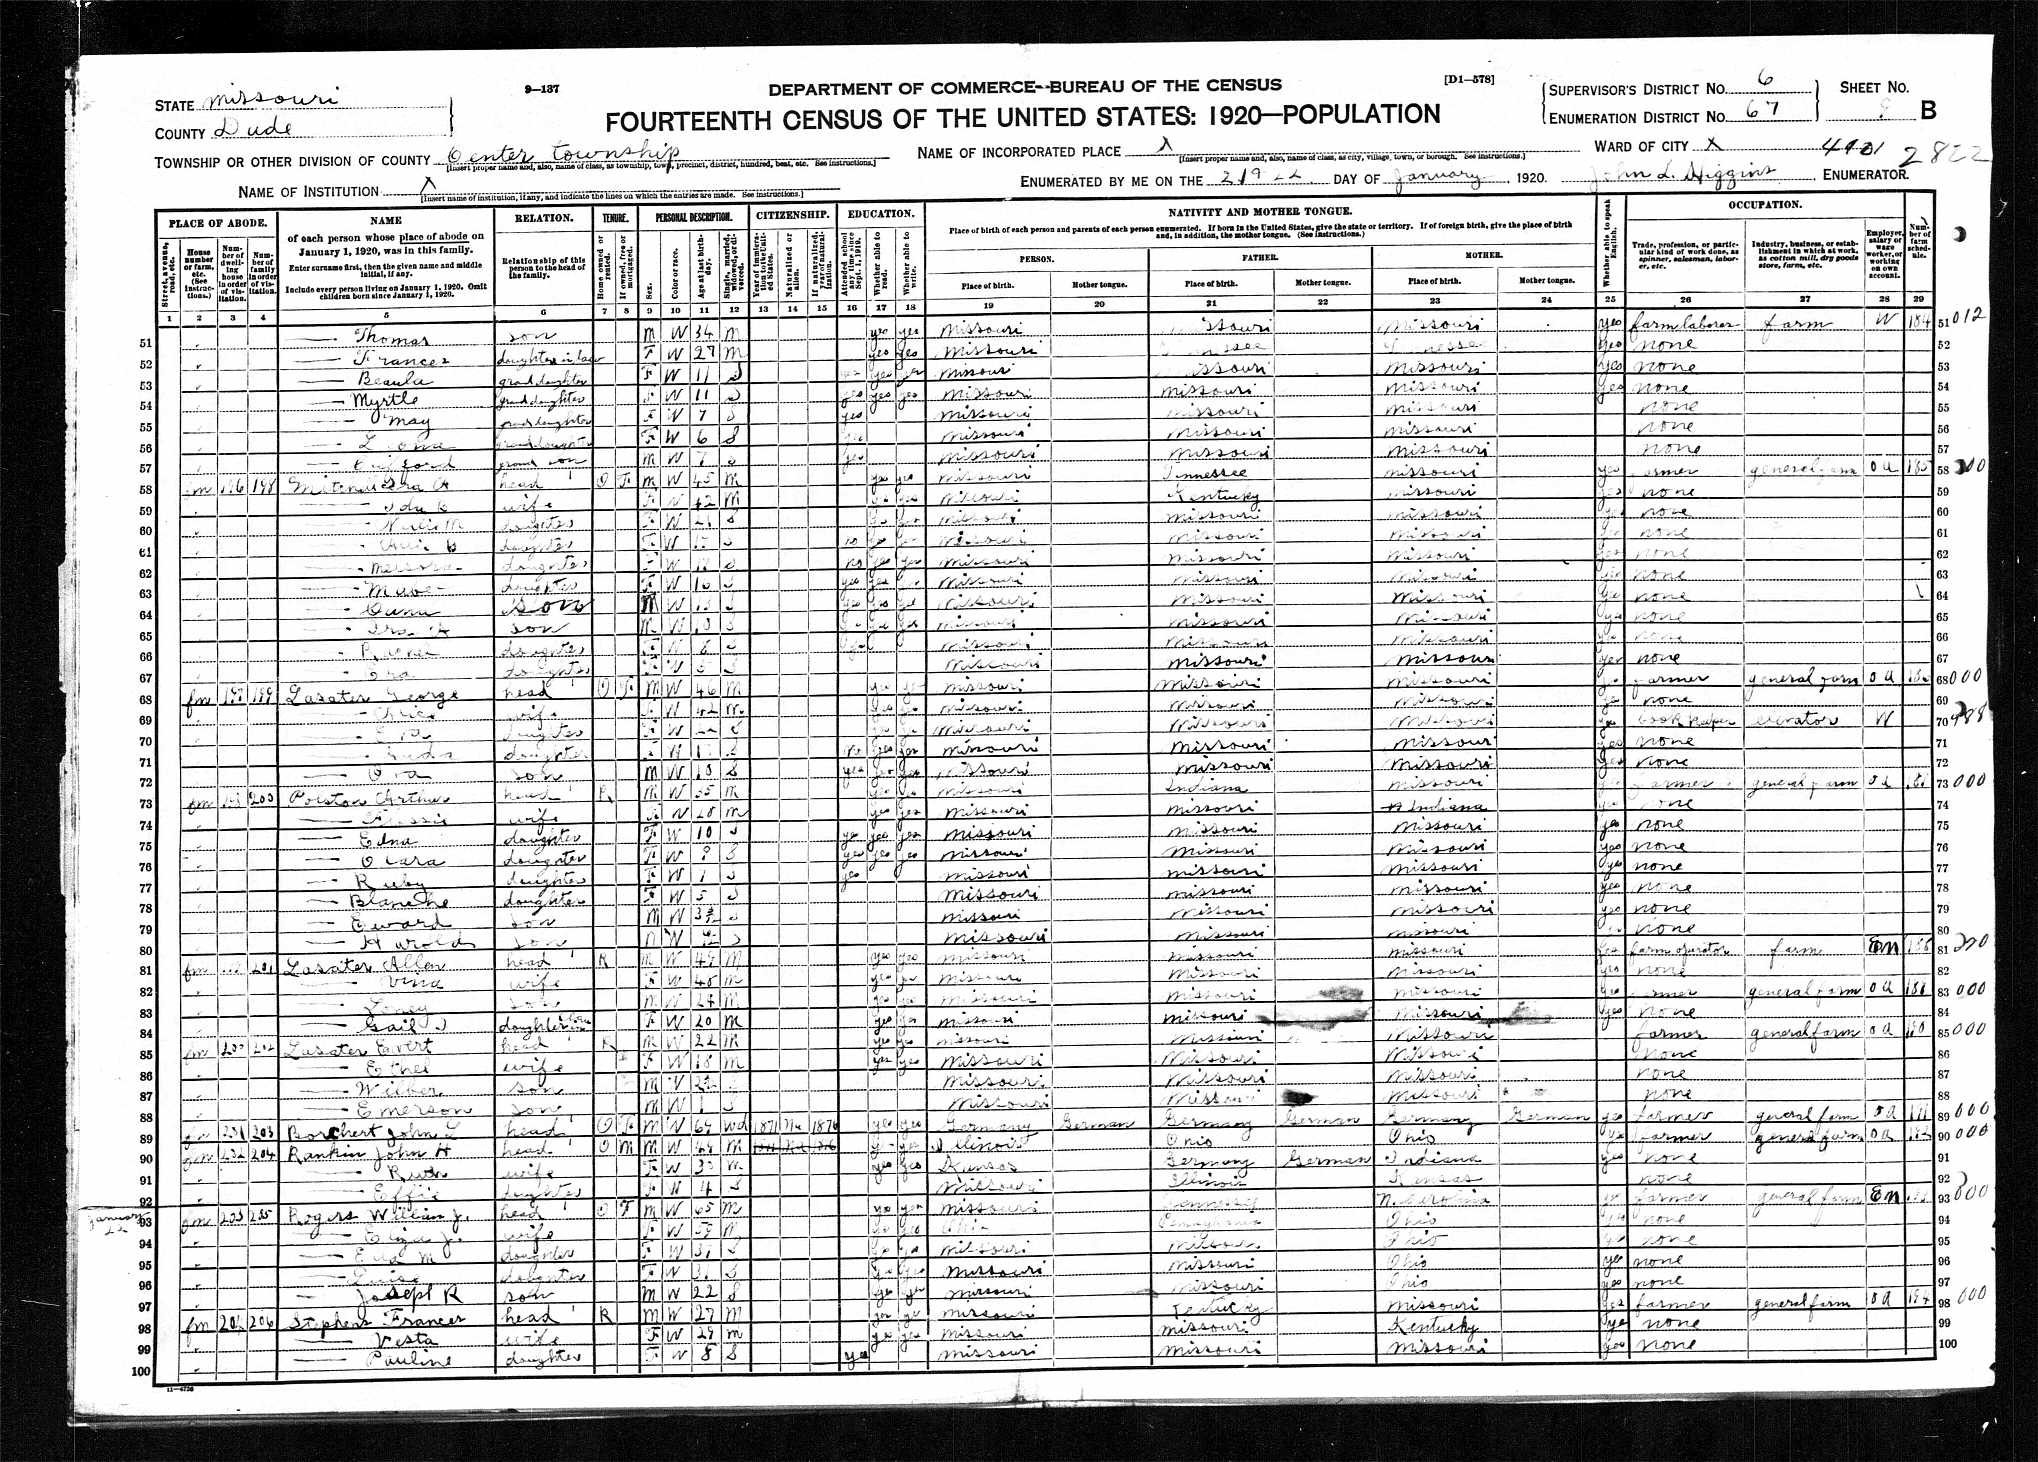 Henry Arthur and Flossie Lee (Lasater) Polston, 1920 Dade County, MIssouri, census